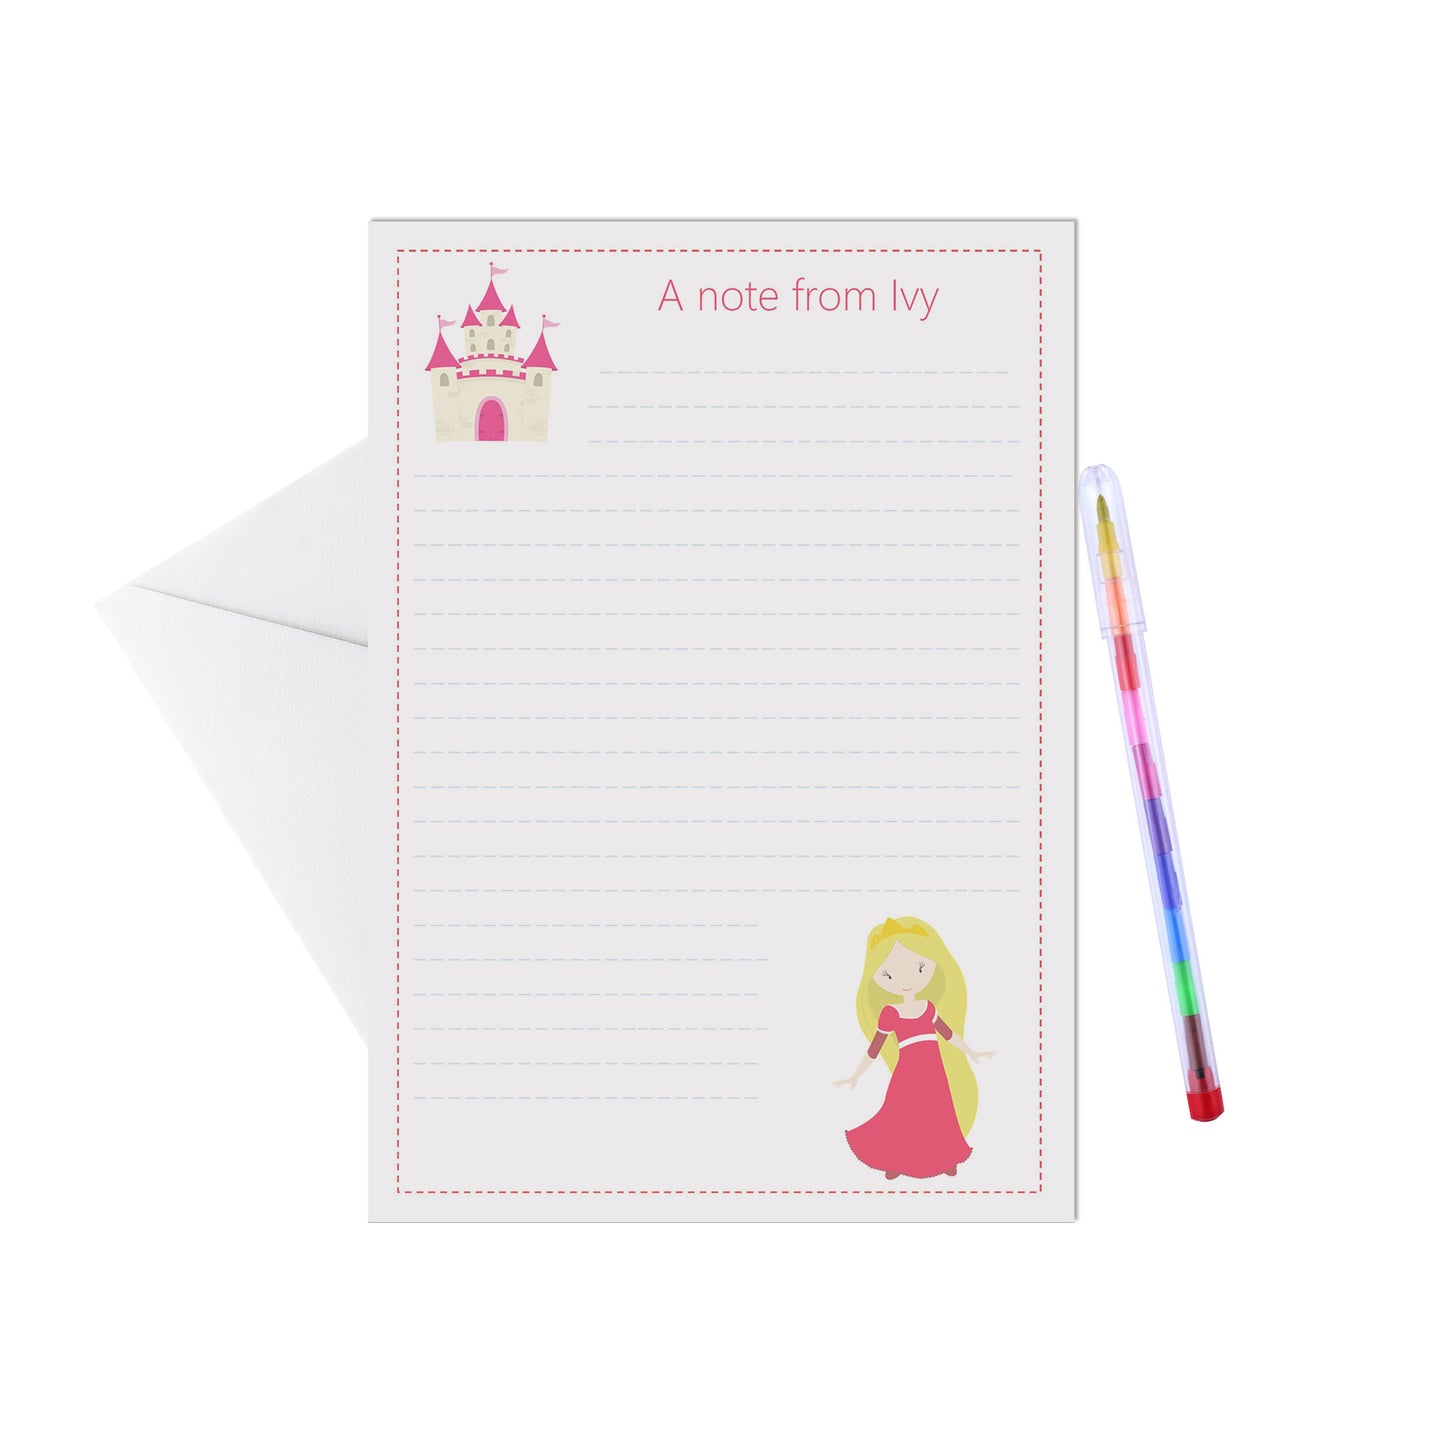 Princess Personalised Letter Writing Set - Pack of 15 Sheets & Envelopes - Lots of Designs